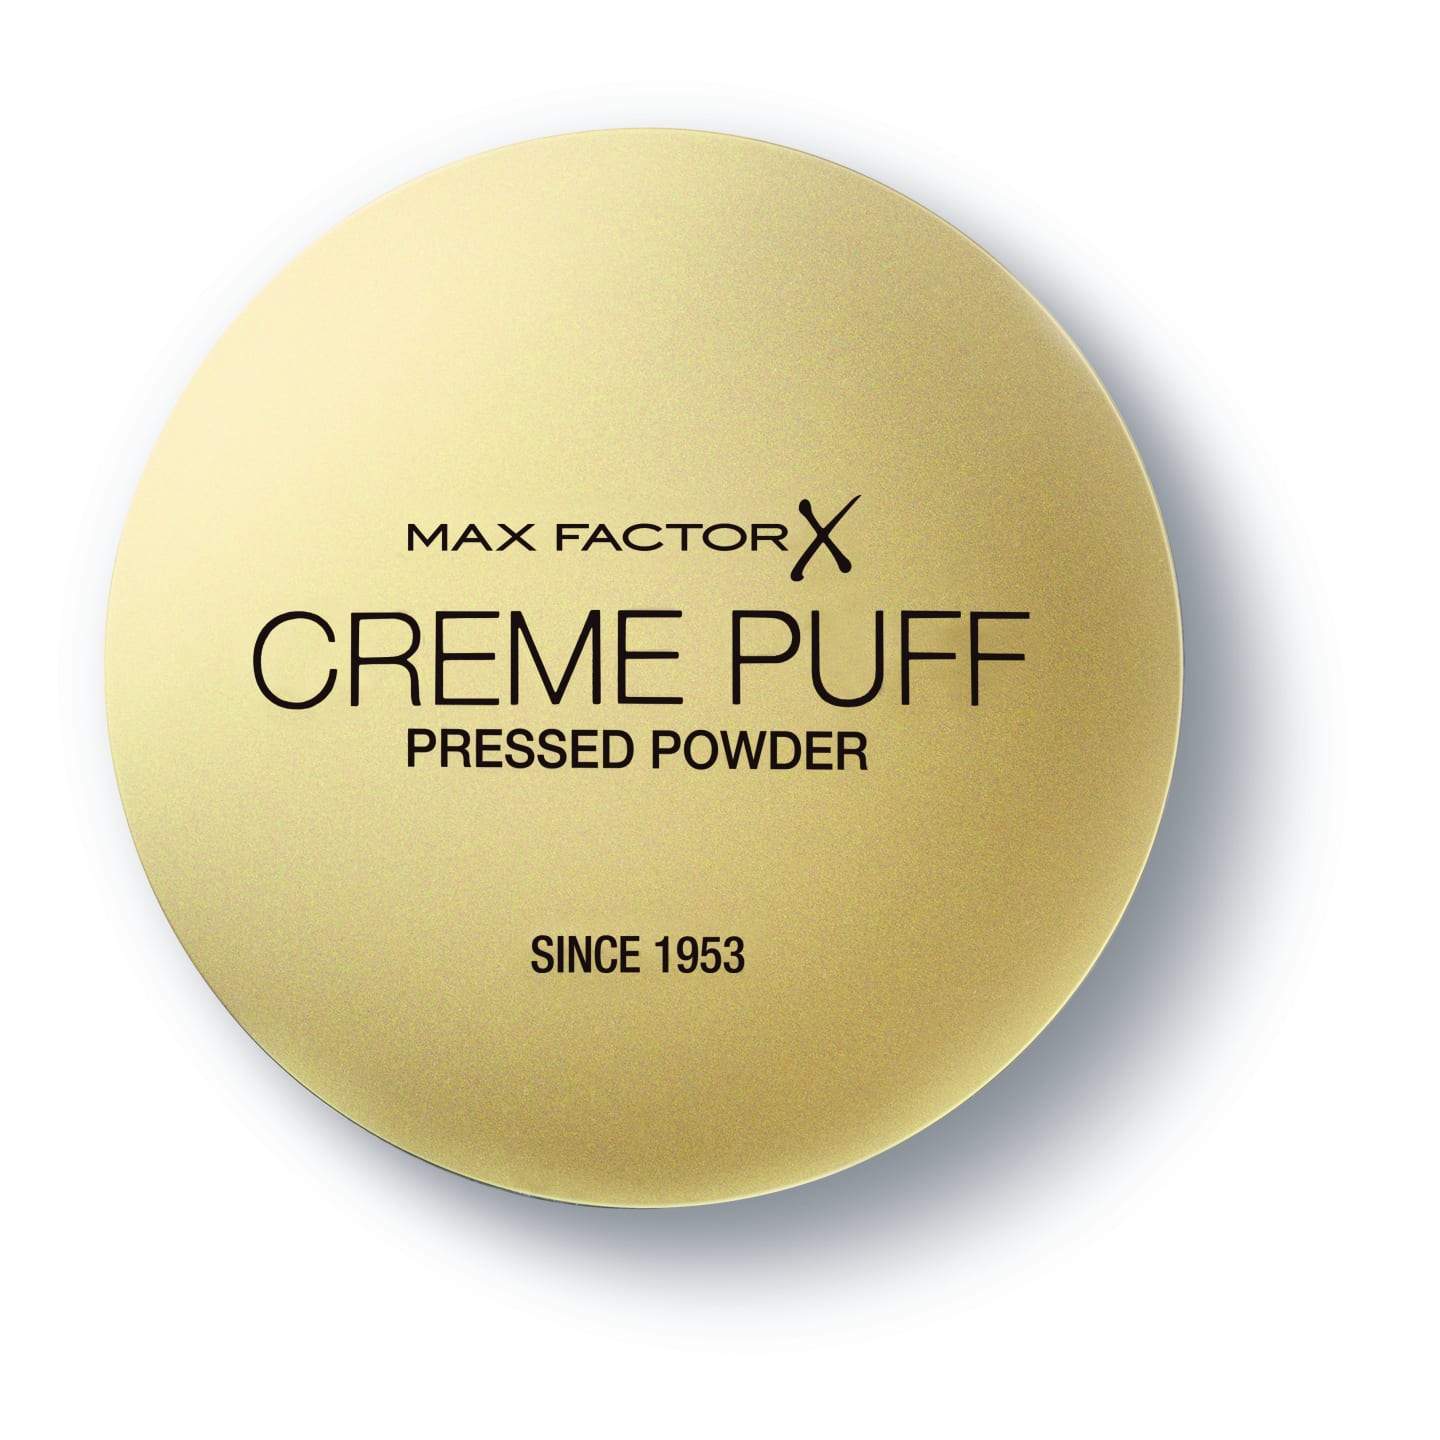 Max Factor Creme Puff - Give Us Beauty